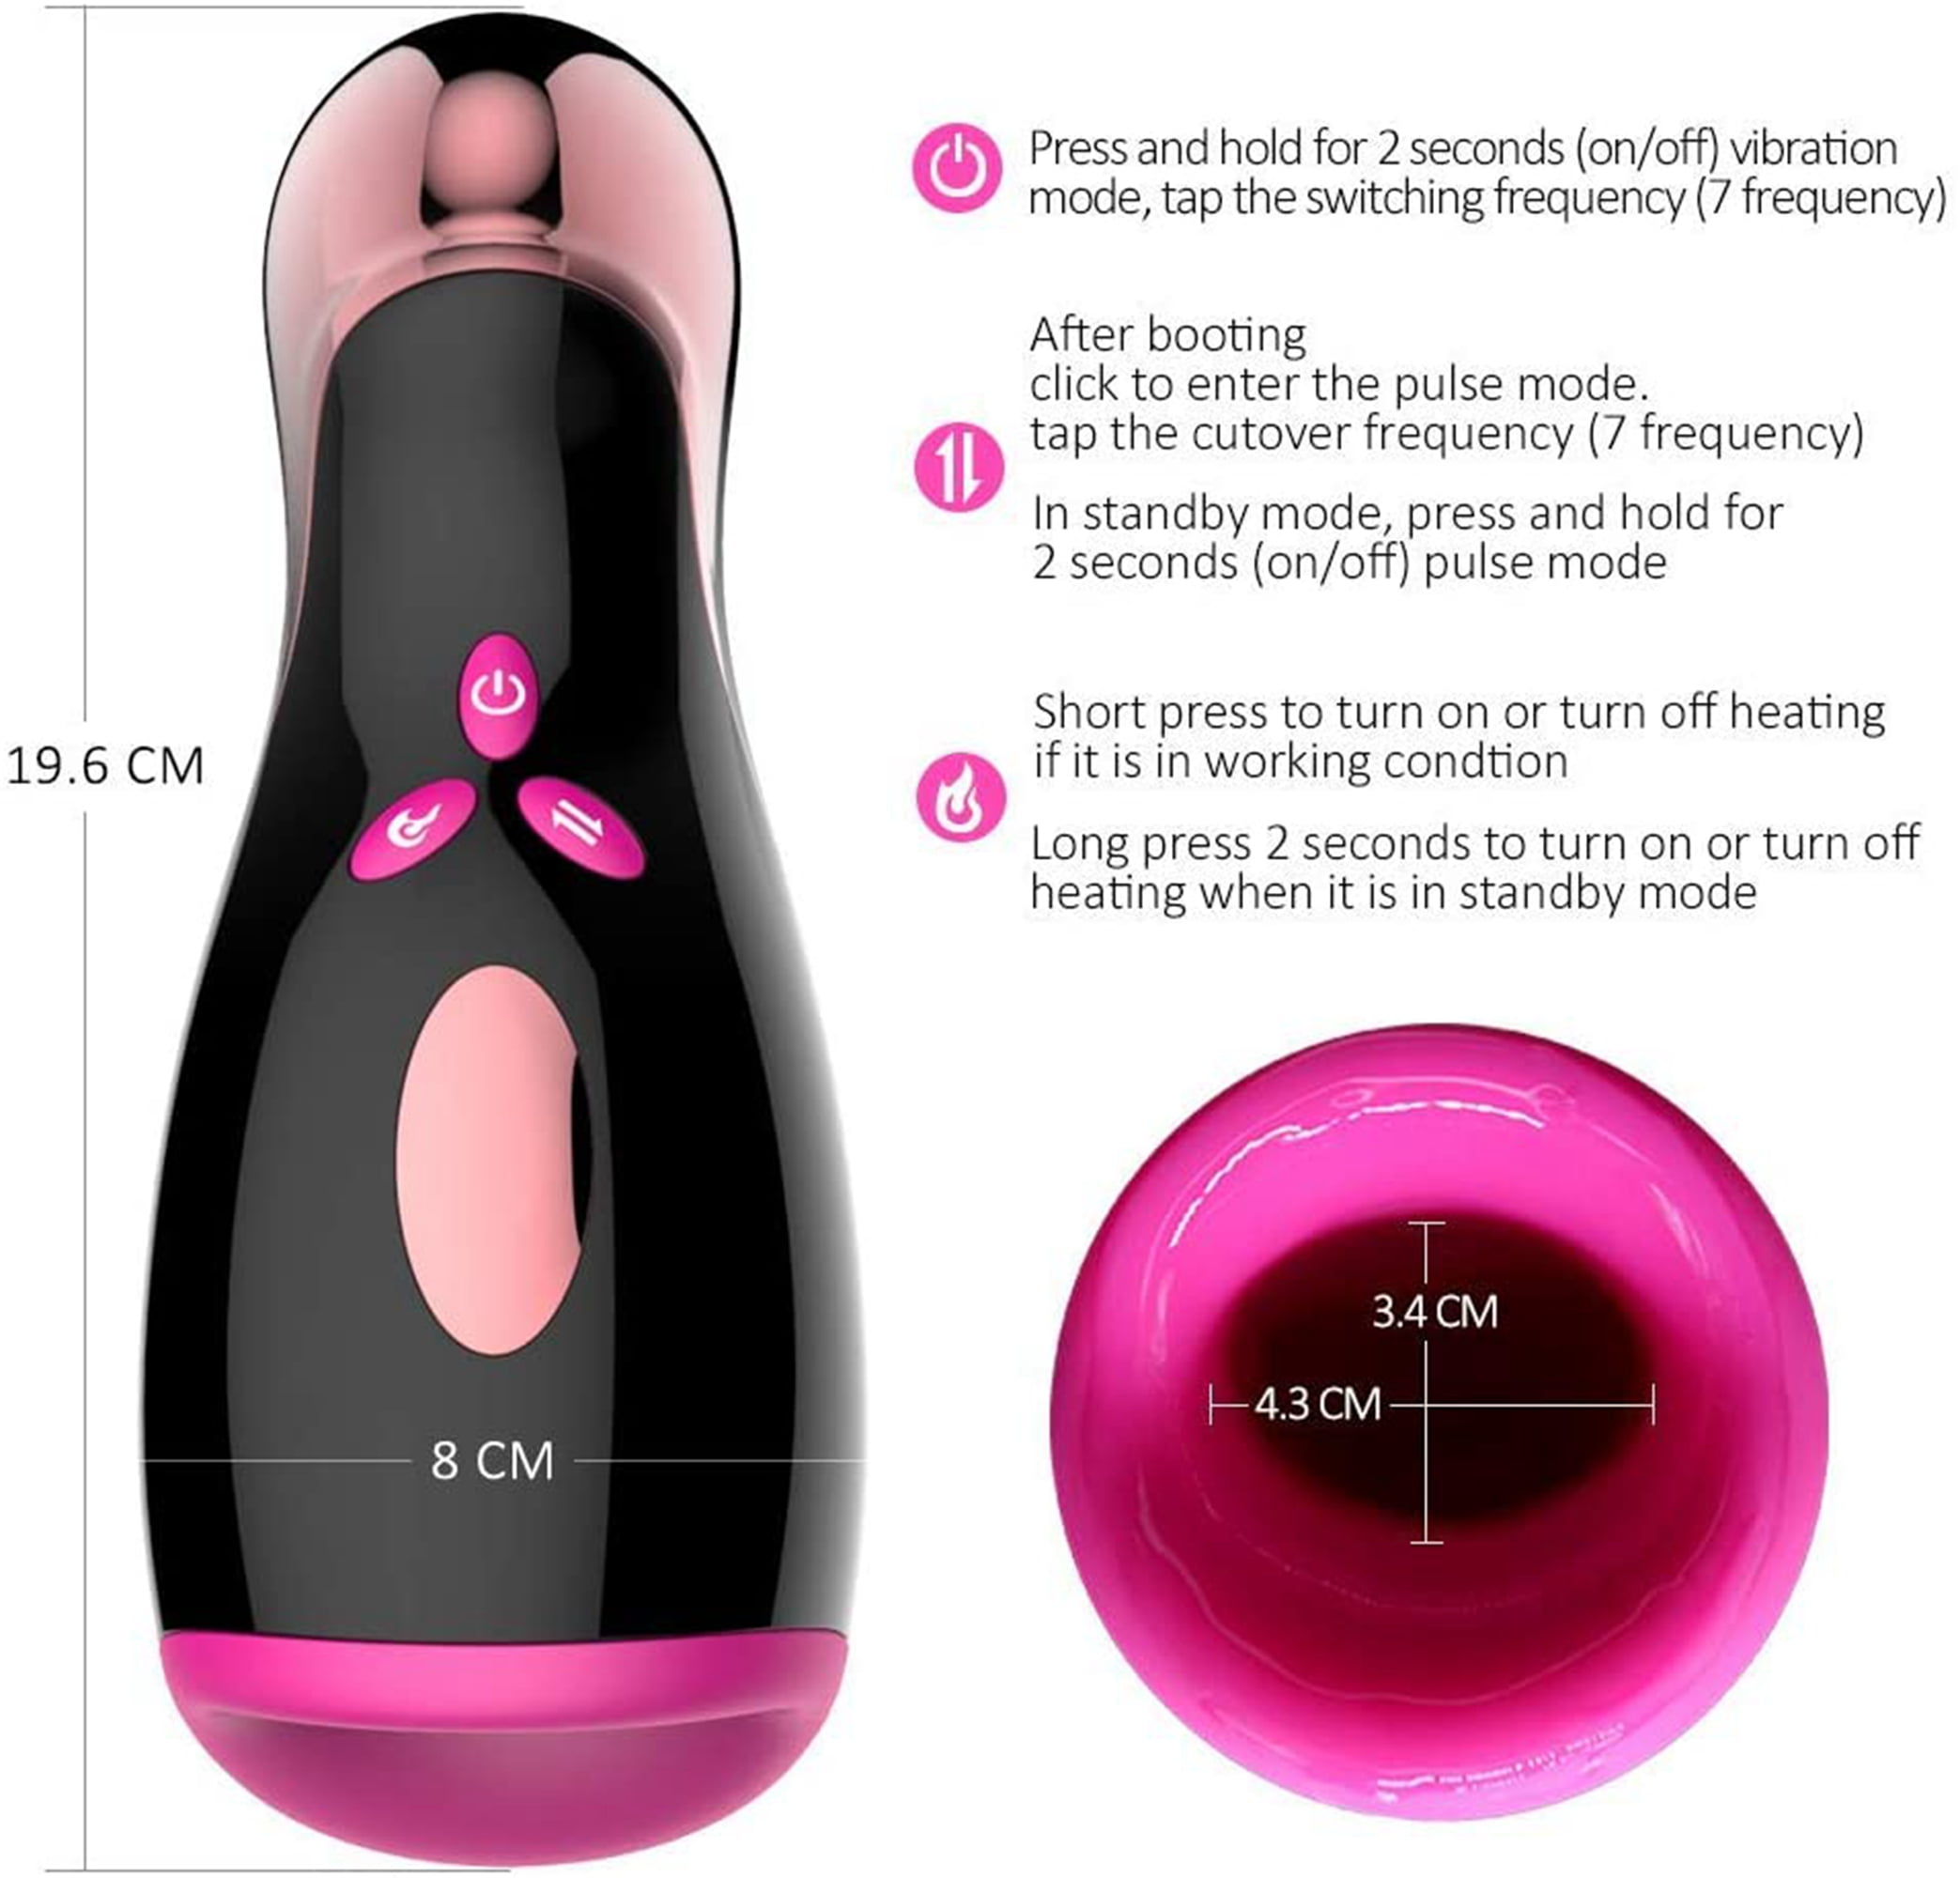 FESXTY Automatic Male Masturbators Sex Toys for Men, with 7 Thrusting and Vibrating and Heating Modes, 40 ℃ Heating for Men Self-Pleasure Masturbation 